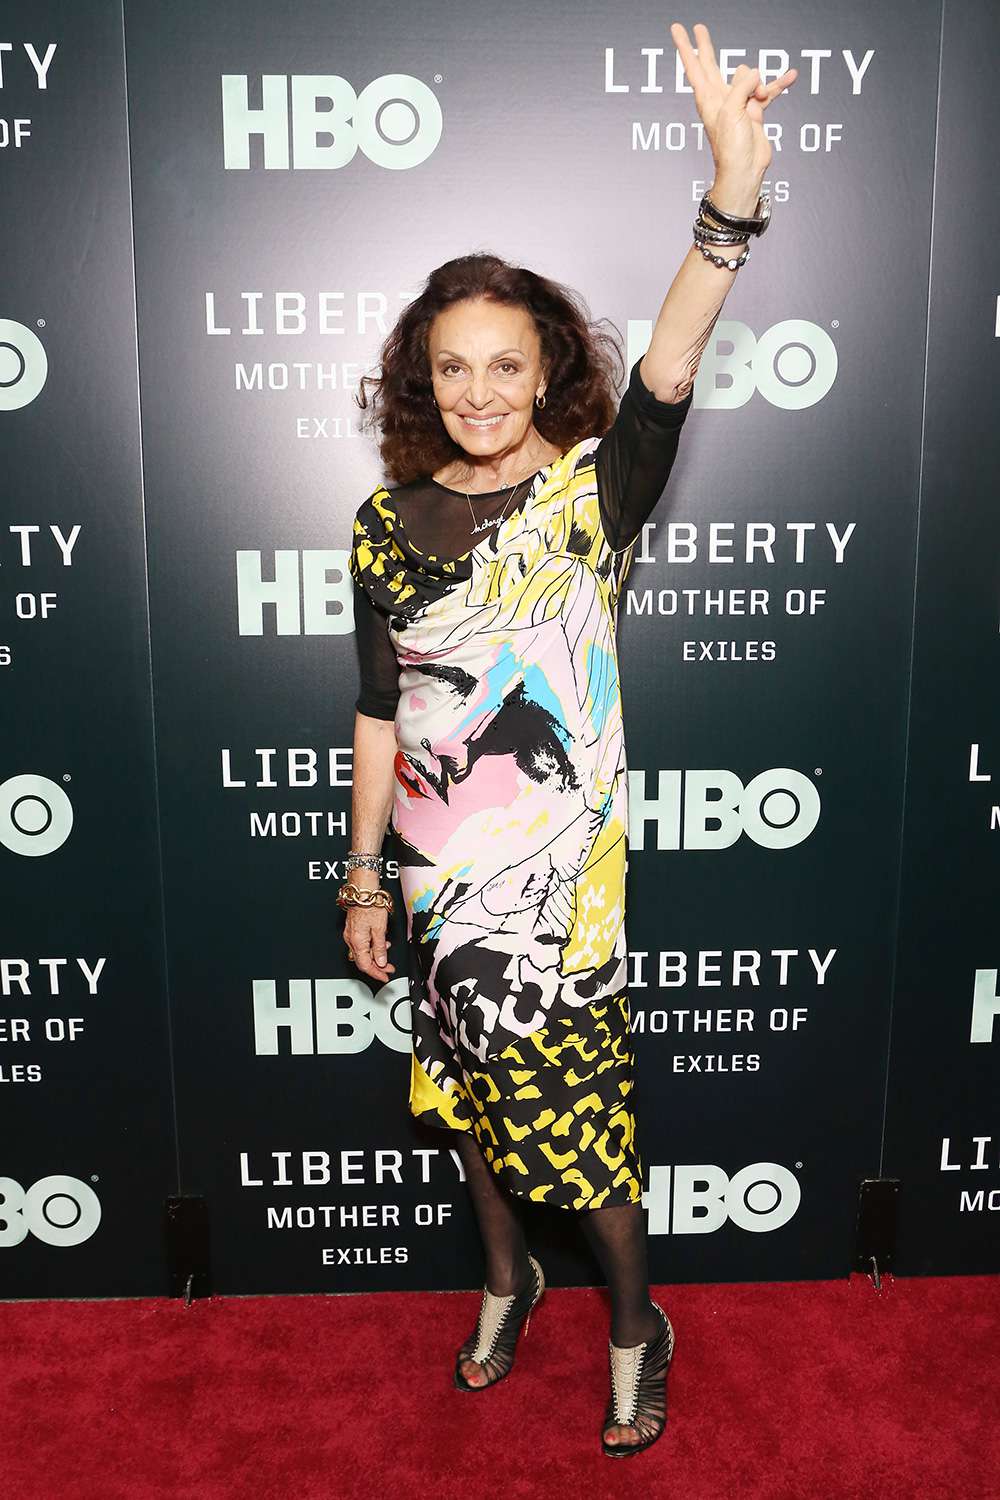 Diane Von Furstenberg attends the "Liberty: Mother Of Exiles" World Premiere at NYIT Auditorium on Broadway on October 07, 2019 in New York City